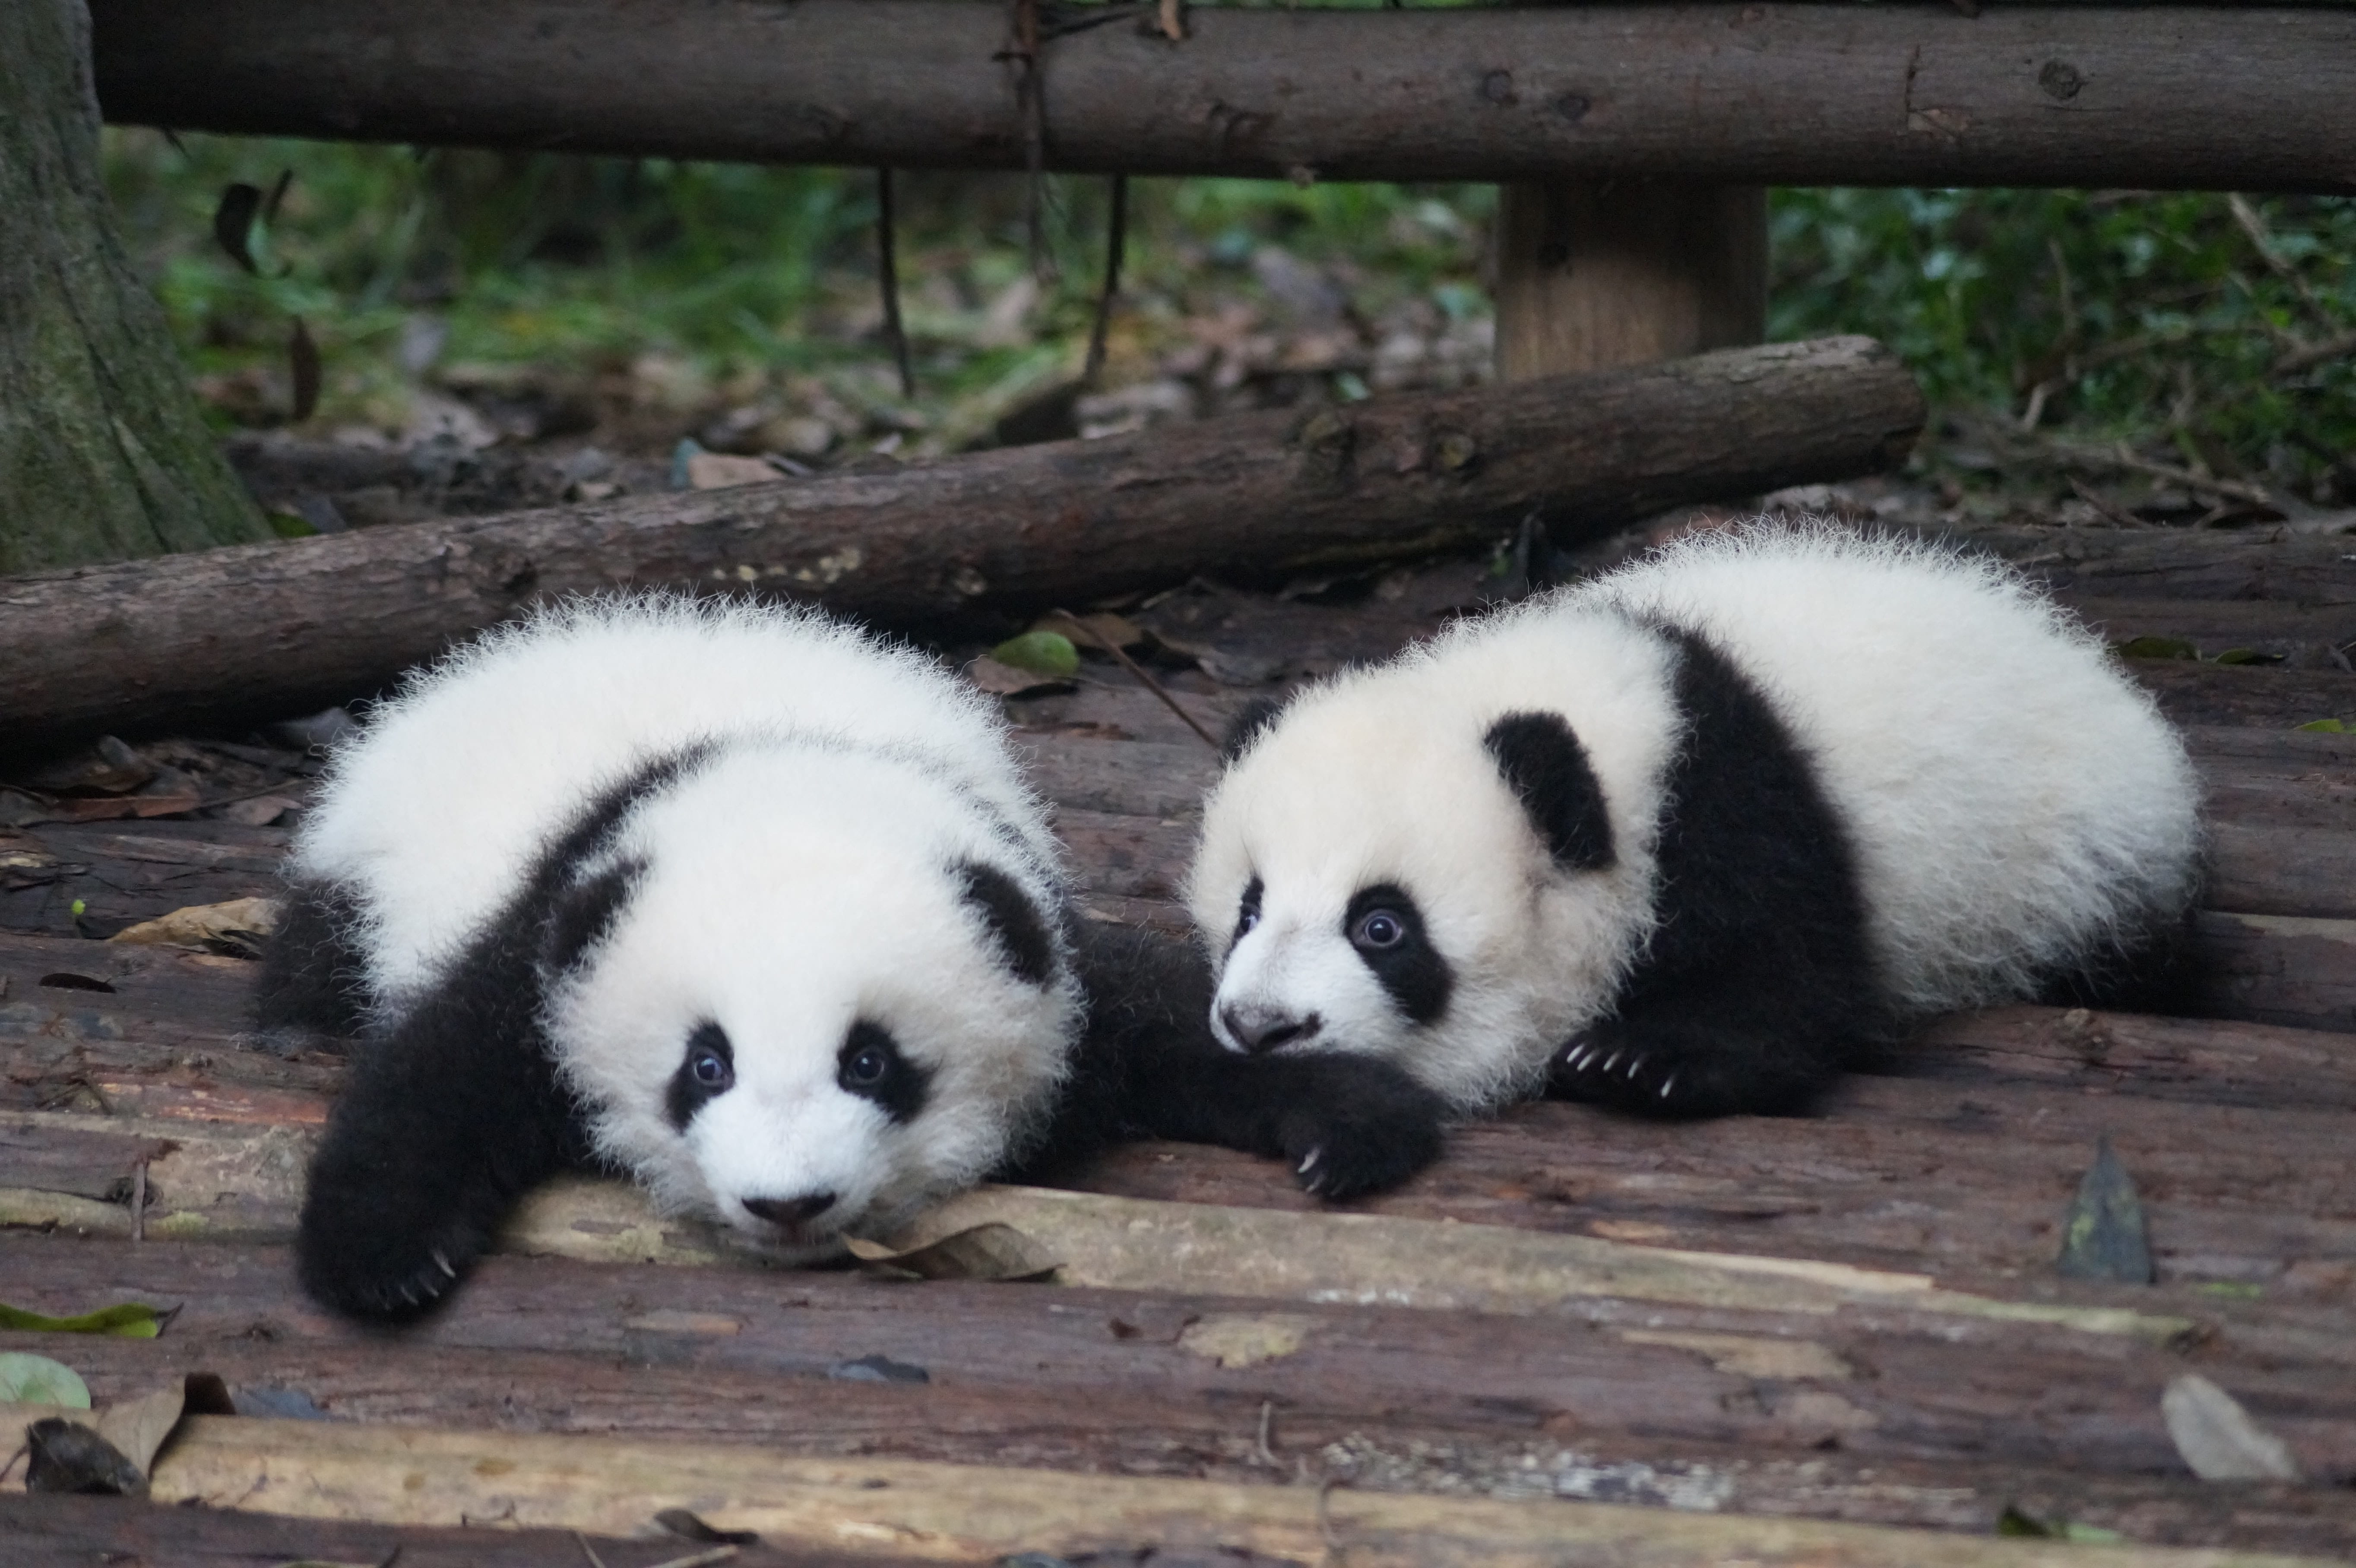 Two baby pandas on a wooden surface. One has its head resting on the other's front leg.